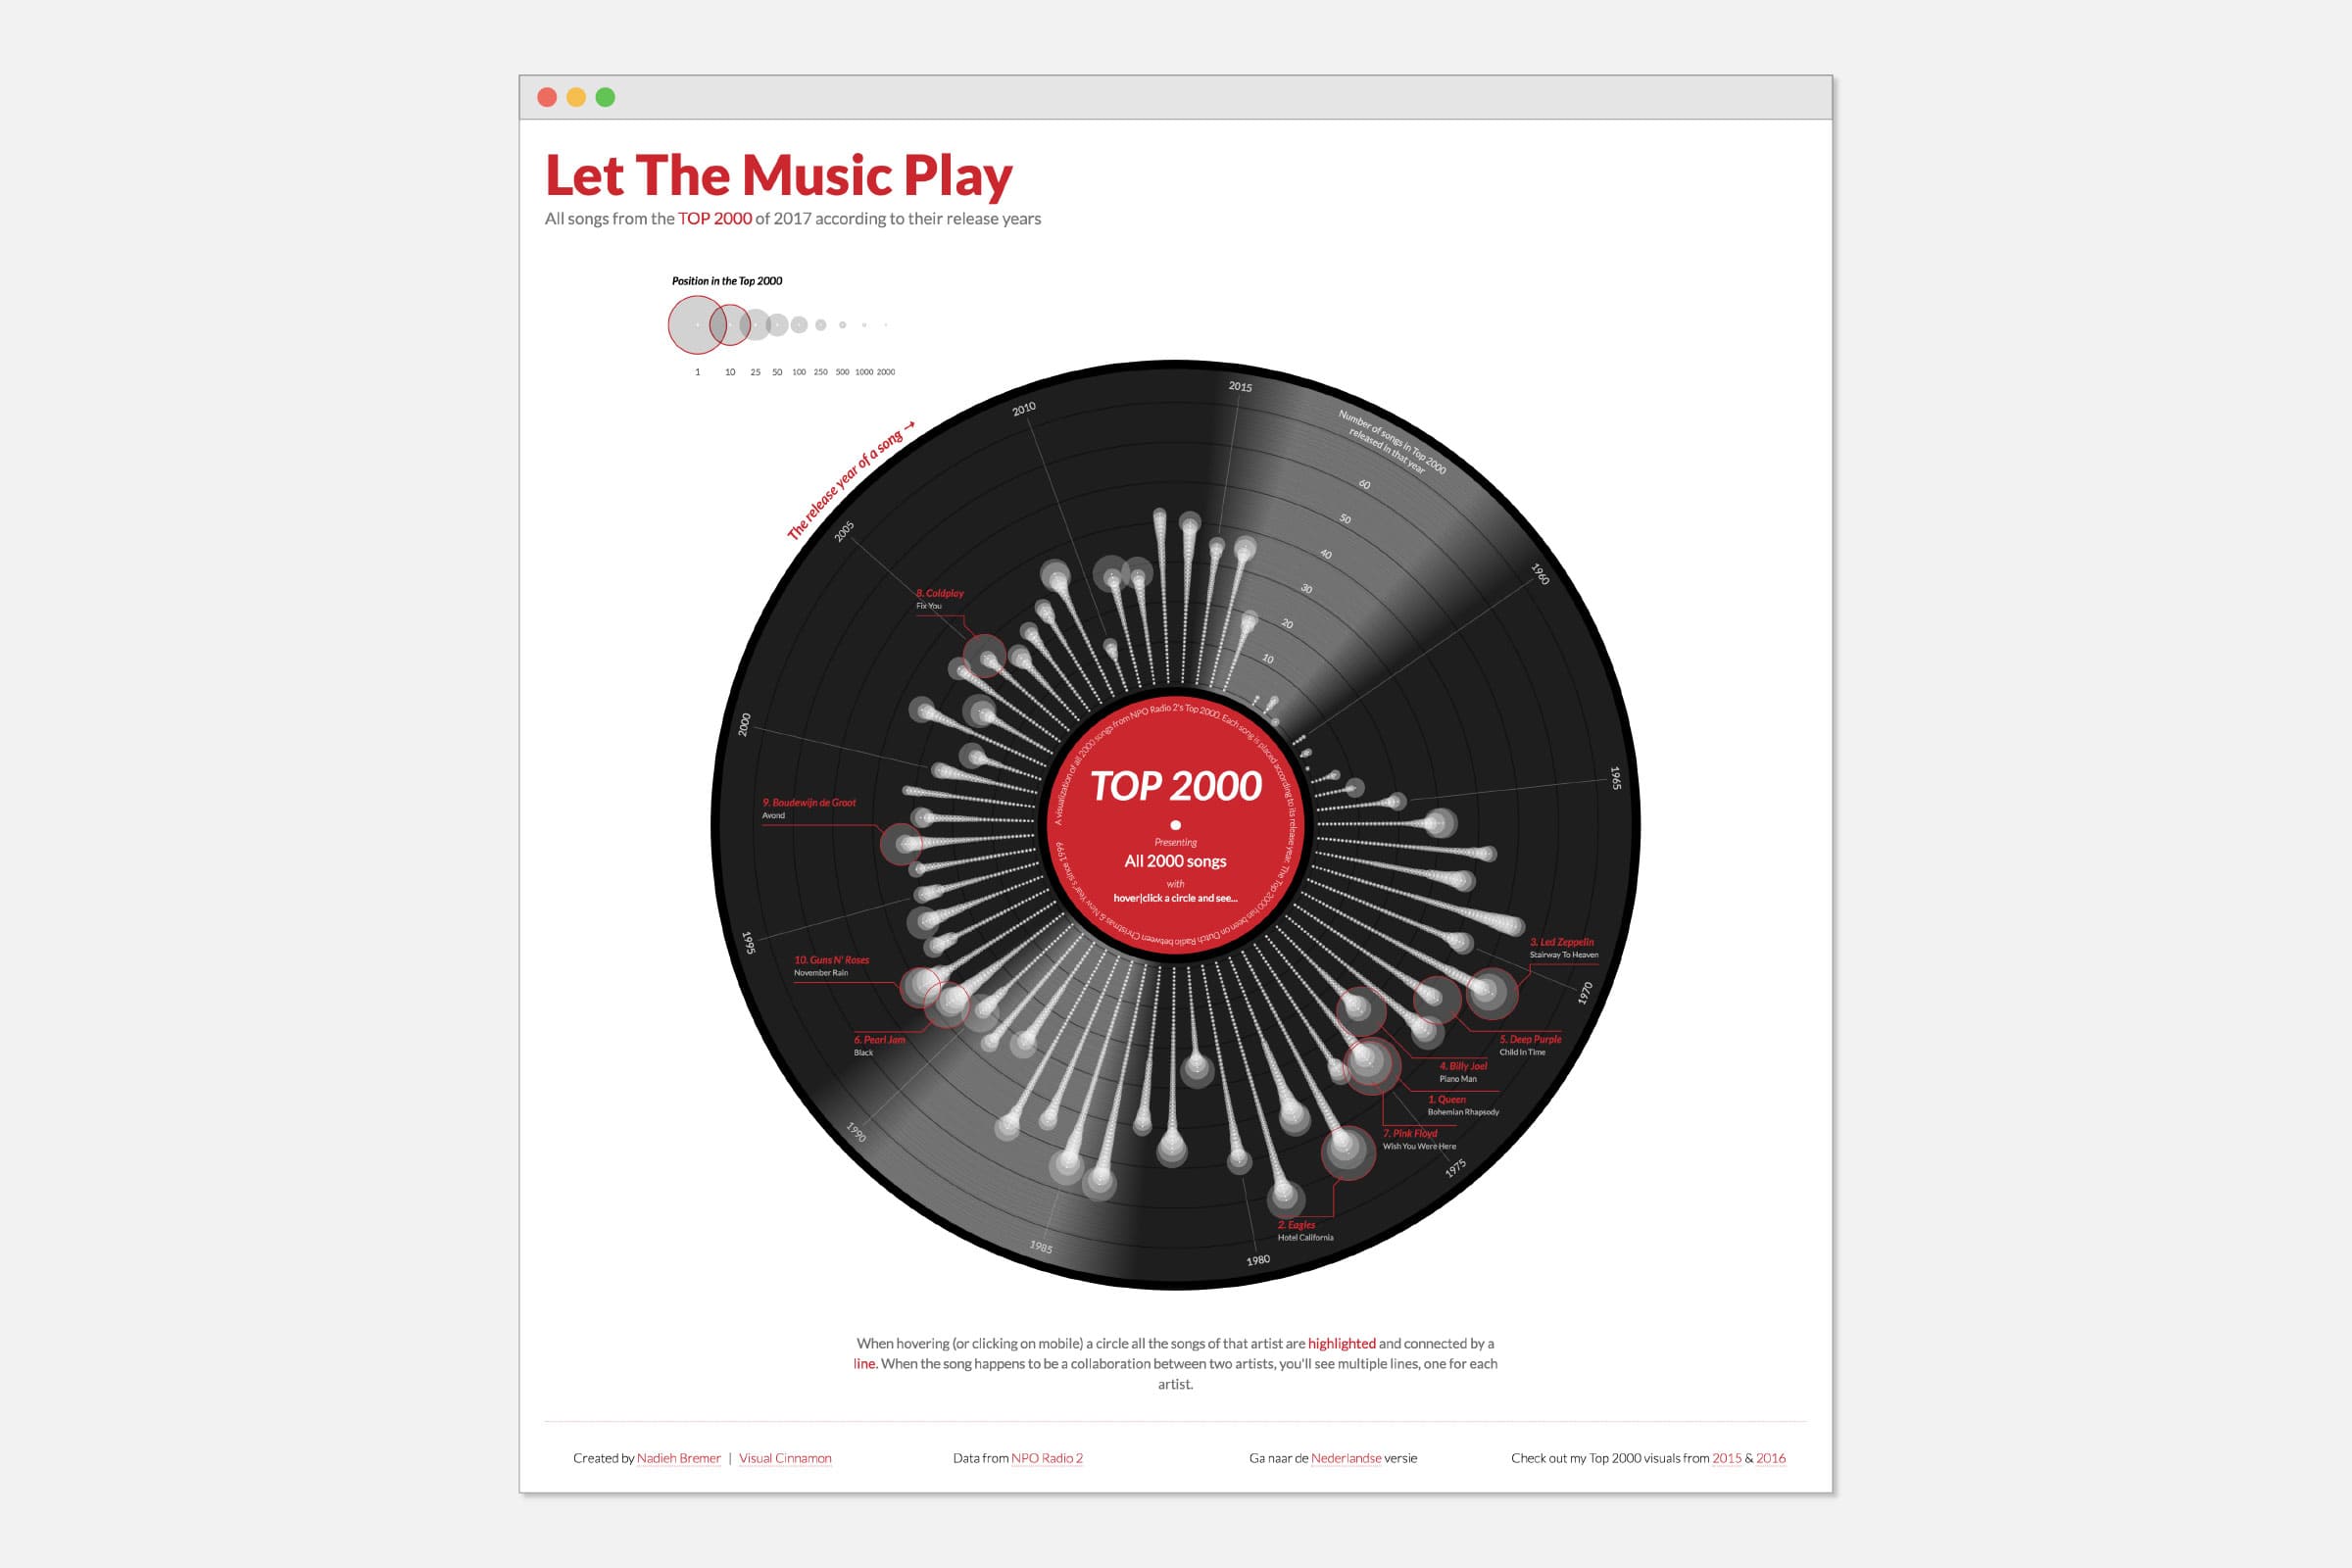 The final result of 'Let the Music Play'